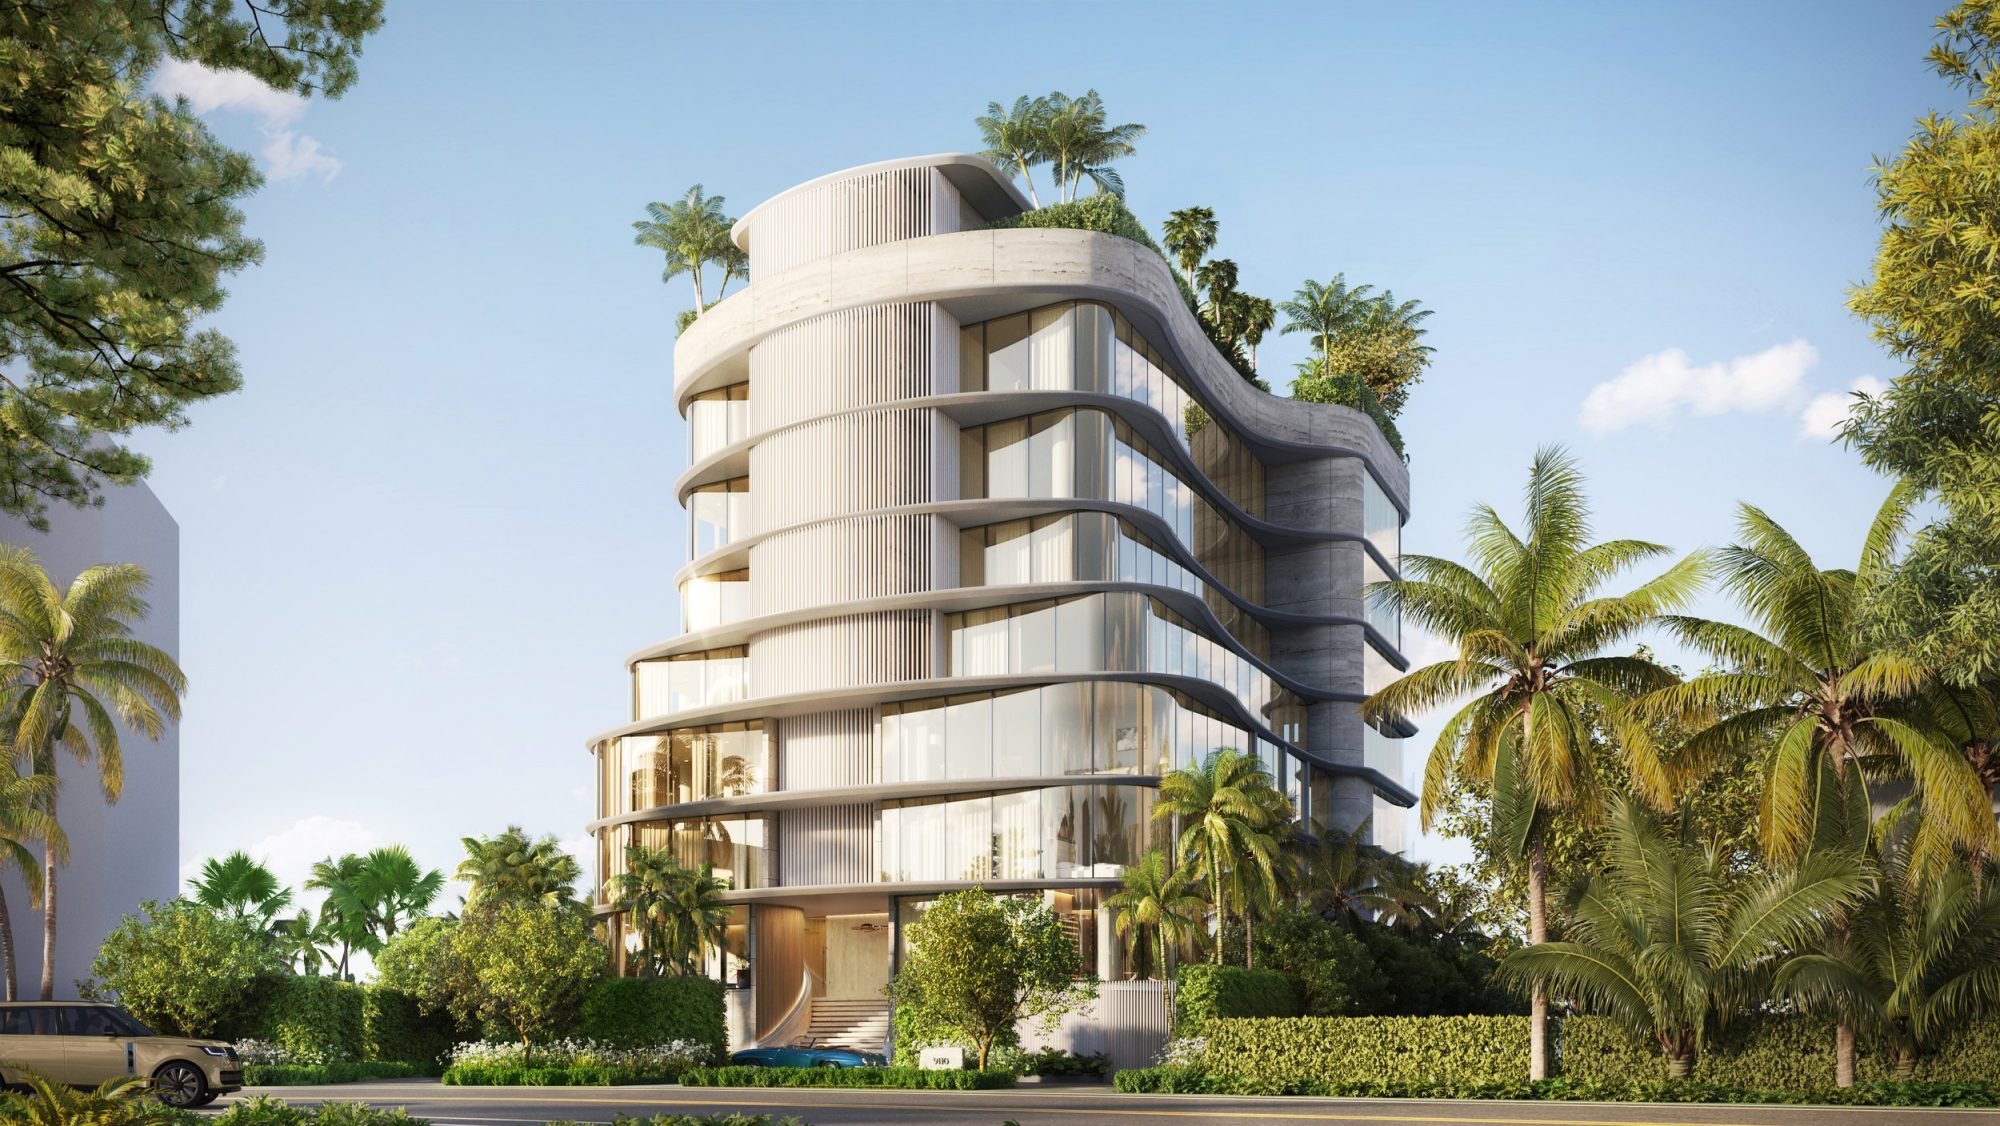 Indian Creek Residences is a limited collection of nine luxurious homes in Miami’s Bay Harbor Islands